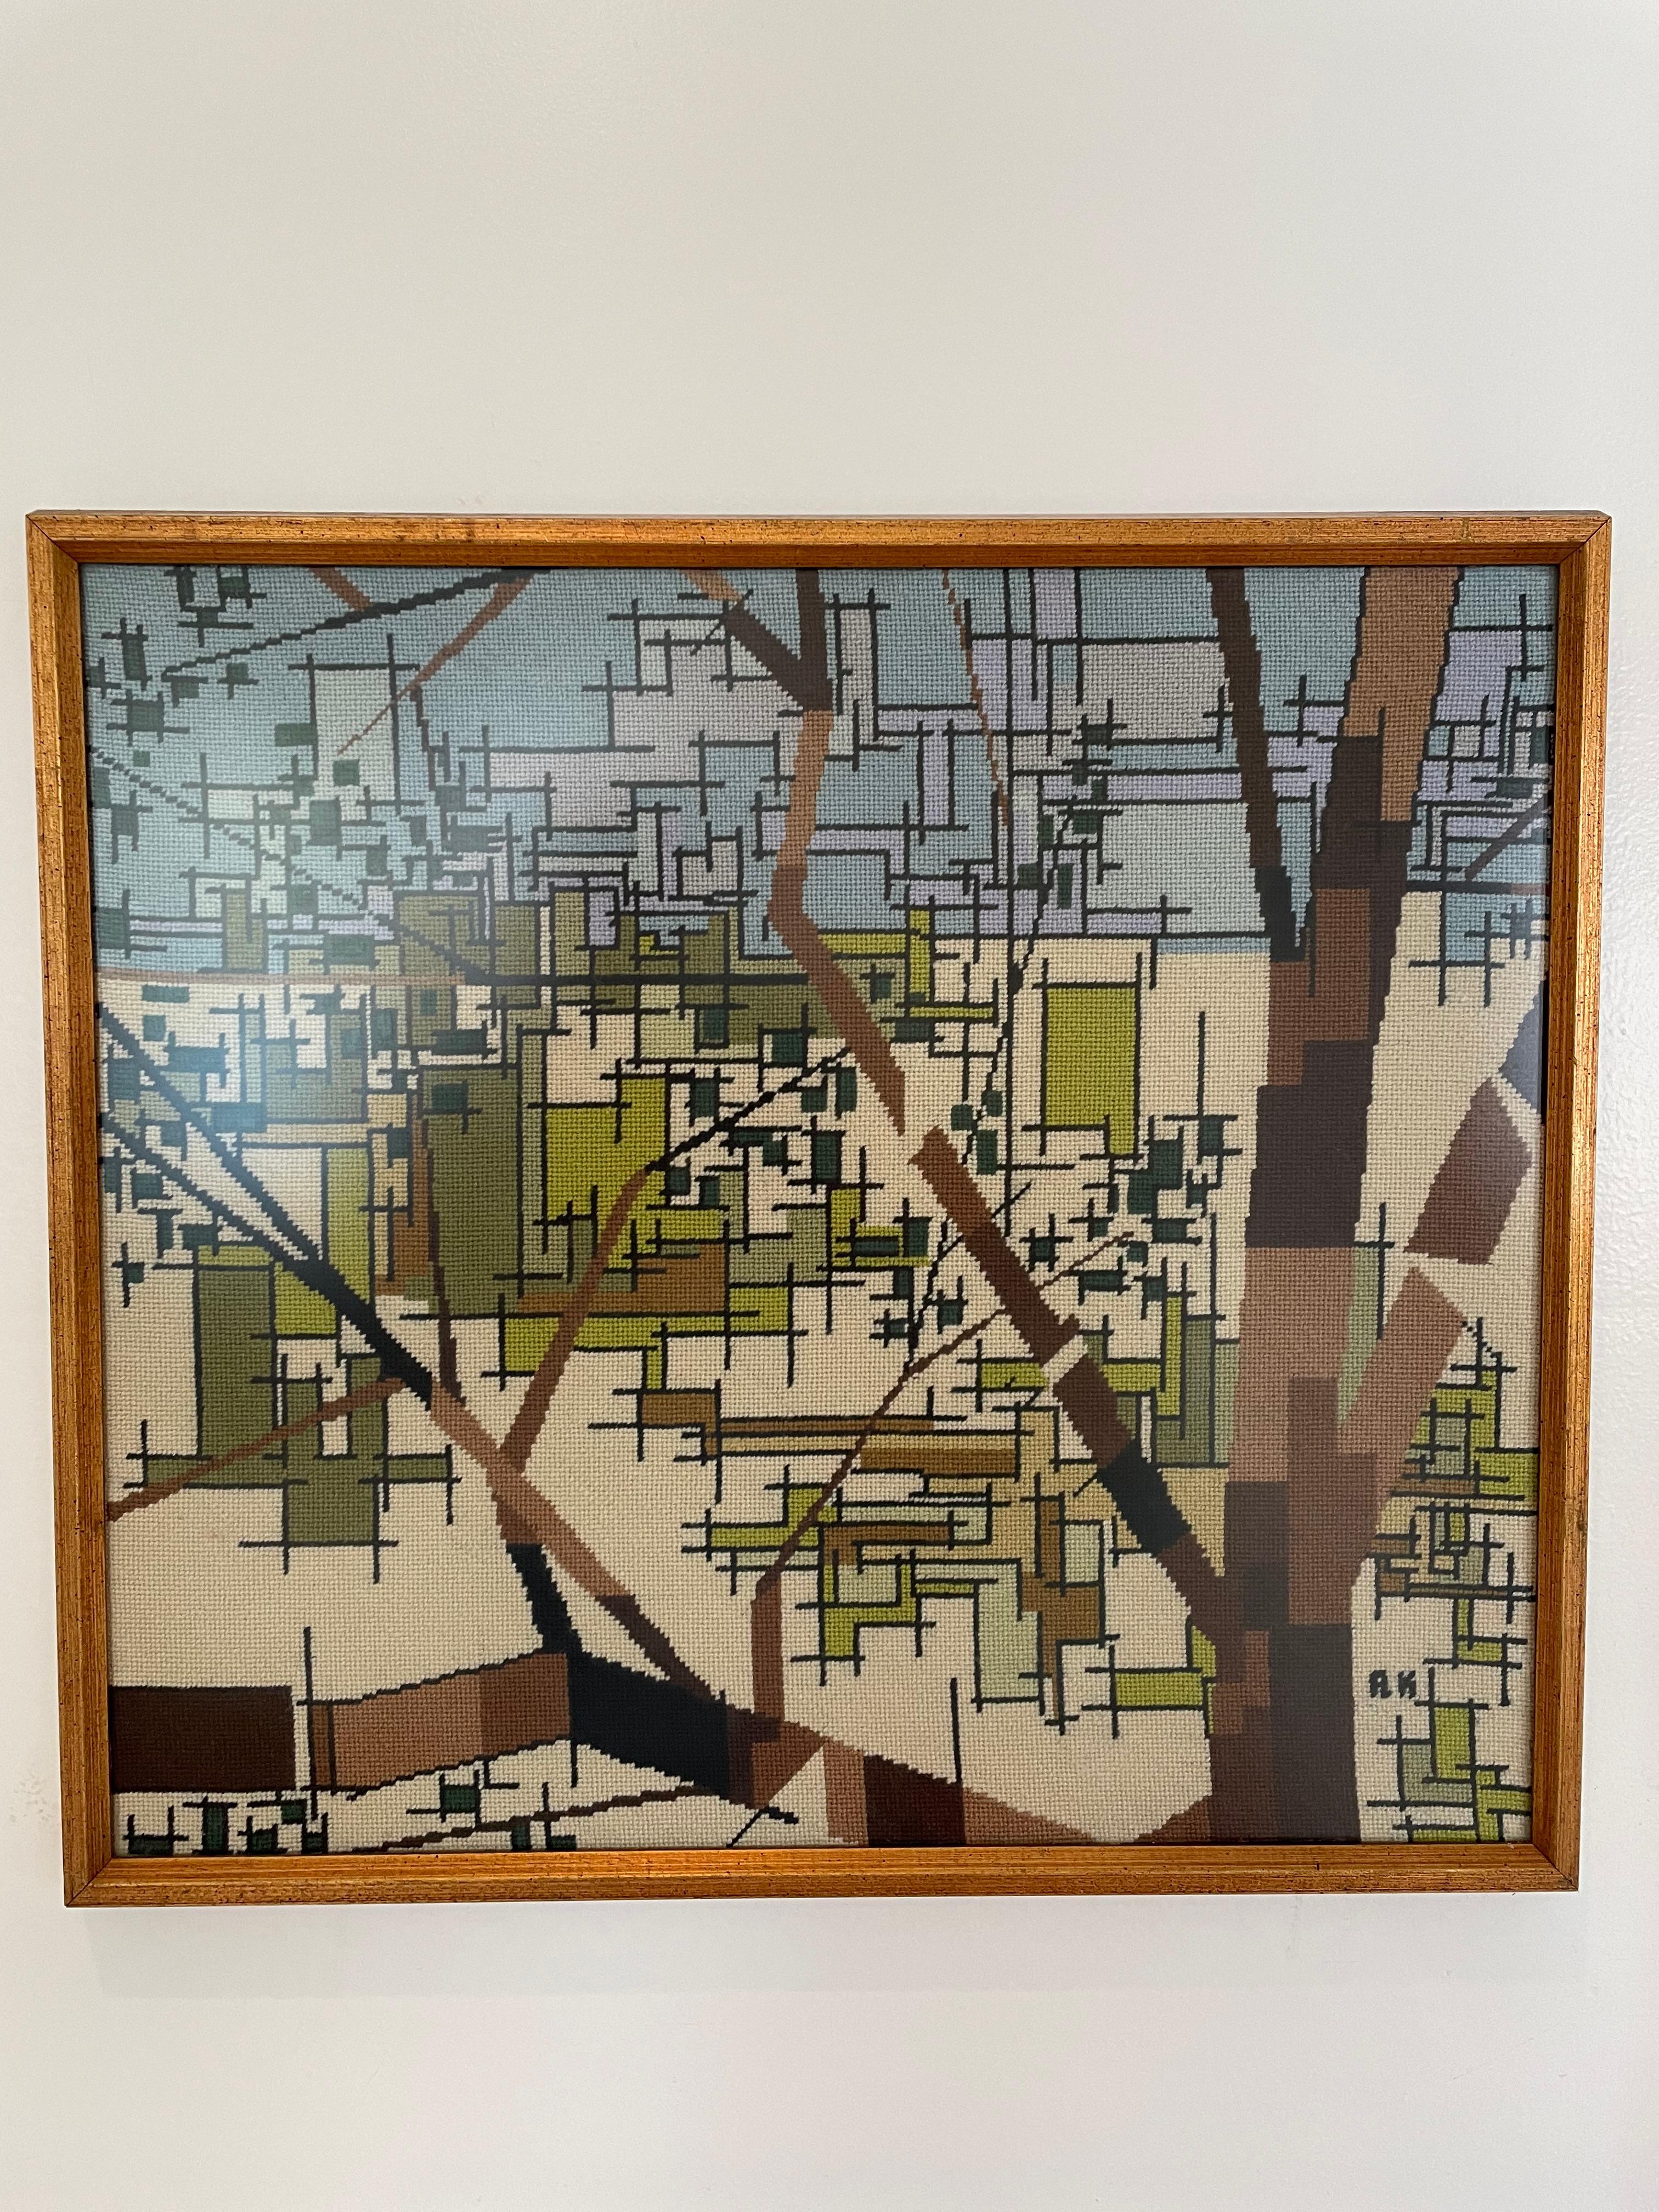 Striking Abstract Needlepoint. Great mid Century design and color. Amazing attention to detail and craftsmanship.signed AK or possibly RK. Gilt period beveled frame.